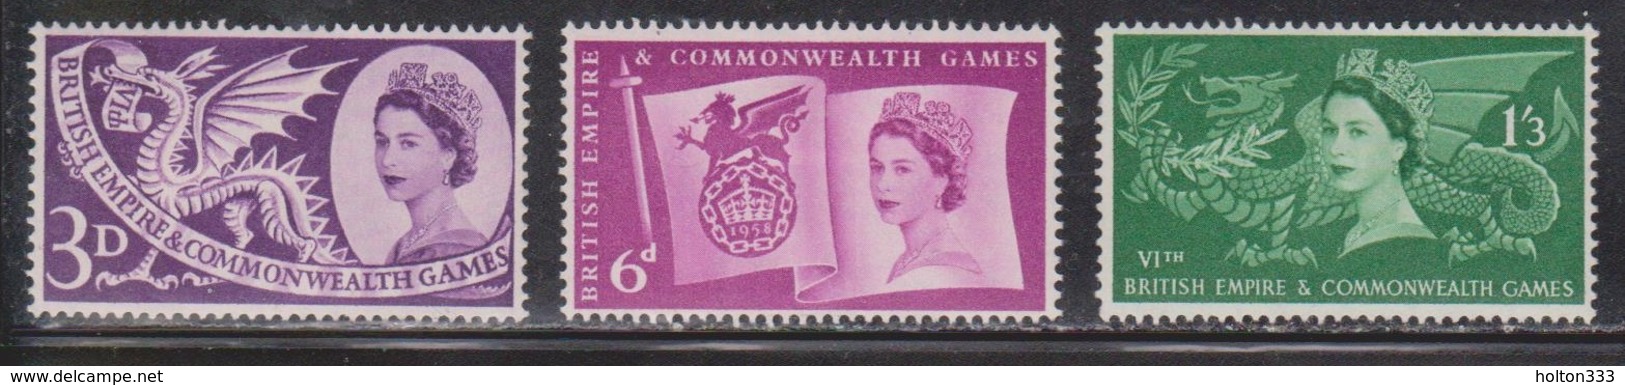 GREAT BRITAIN Scott # 338-40 MH - QEII & Commonwealth Games - Used Stamps